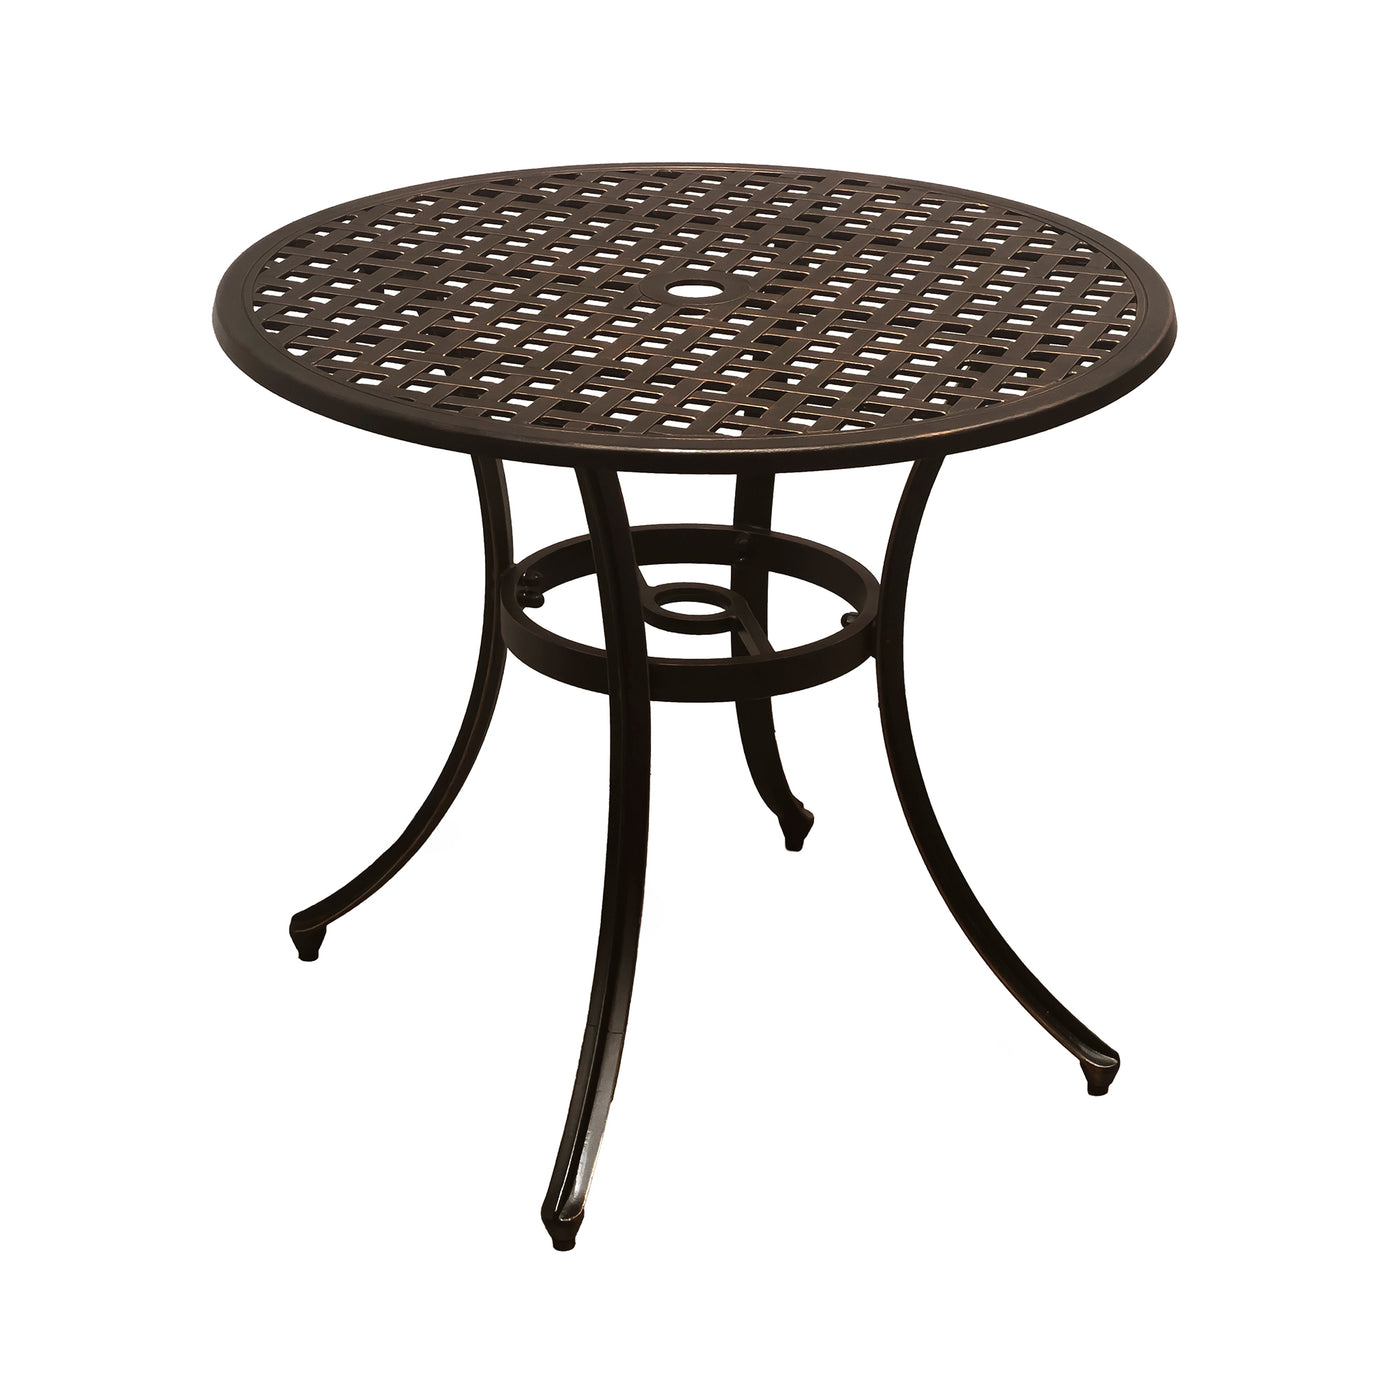 Lily 33" Round Outdoor Dining Table for Patio